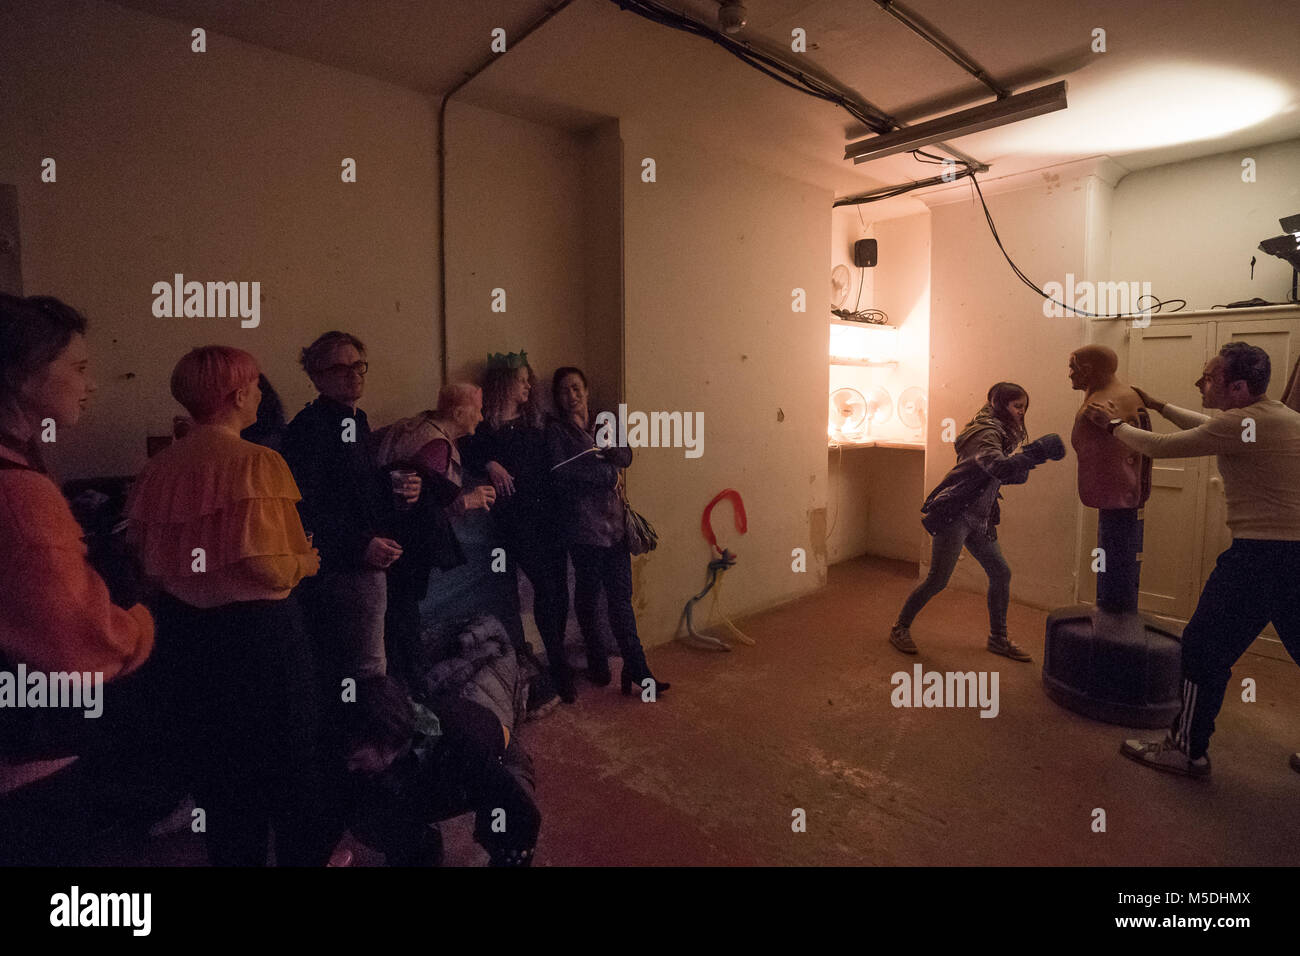 London, UK. 21st Feb, 2018. Audience members being taught how to box as part of Party Skills for the End of the World, an interactive theatre event by Nigel Barrett and Louise Mari at Shoreditch Town Hall in London. Photo date: Wednesday, February 21, 2018. Credit: Roger Garfield/Alamy Live News Stock Photo